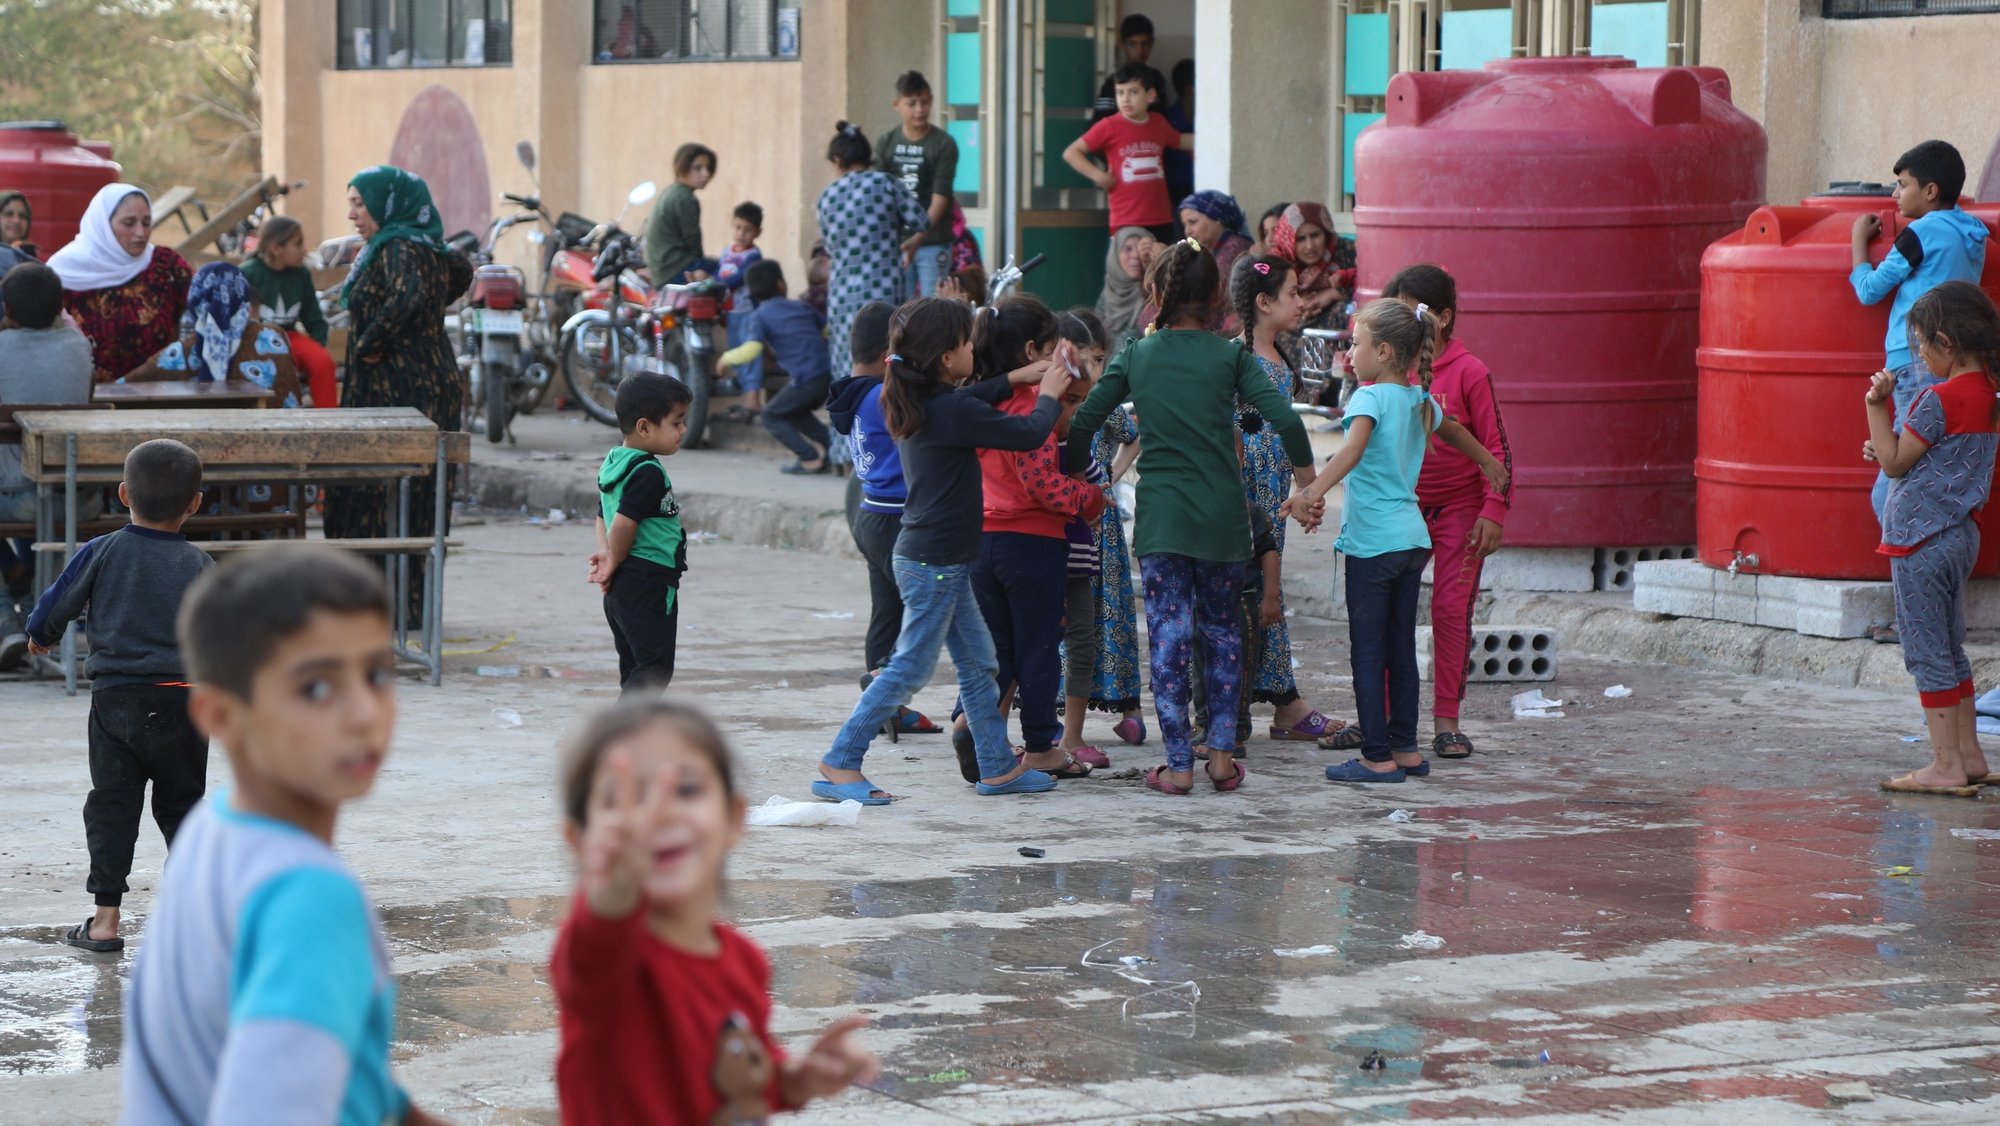 epa07920763 Displaced Kurdish children who fled their home town of Ras al-Ain city play at temporary shelter in a school building at Tal Tamr town, northeast of Syria, 14 October 2019. Turkey has launched an offensive targeting Kurdish forces in north-eastern Syria, days after the US withdrew troops from the area.  EPA/STR